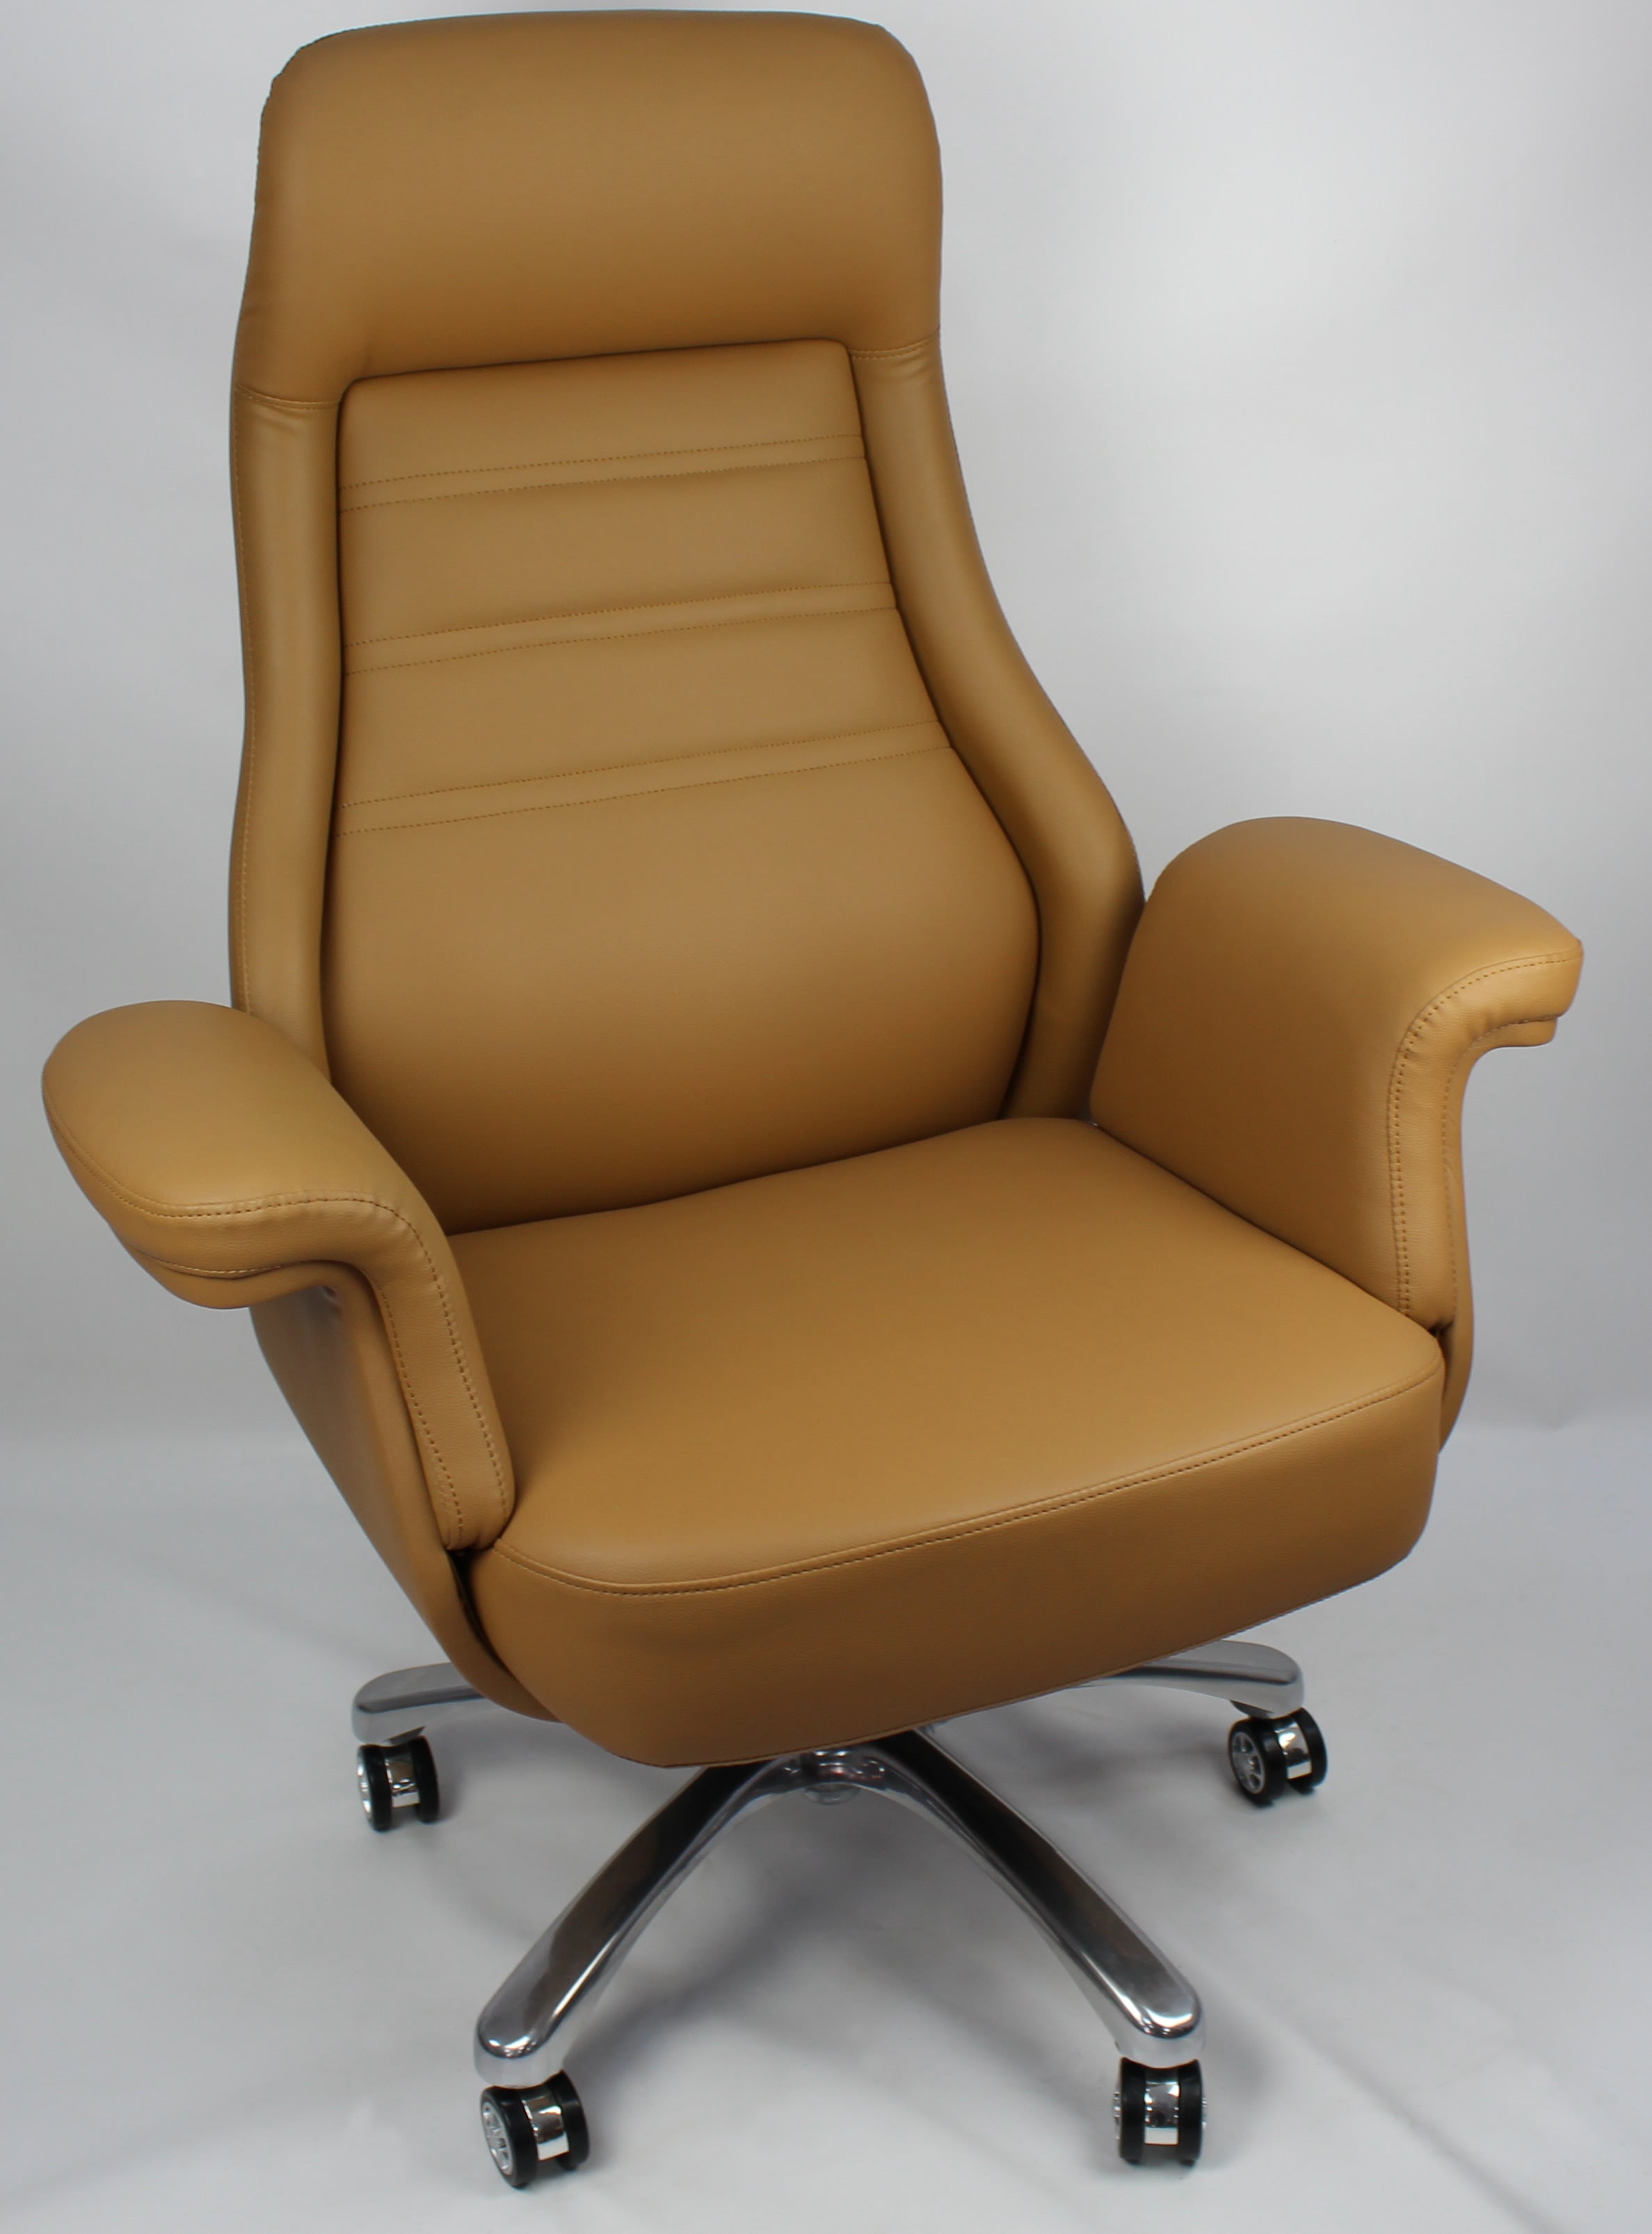 Beige Leather Executive Office Chair - DH-090 North Yorkshire